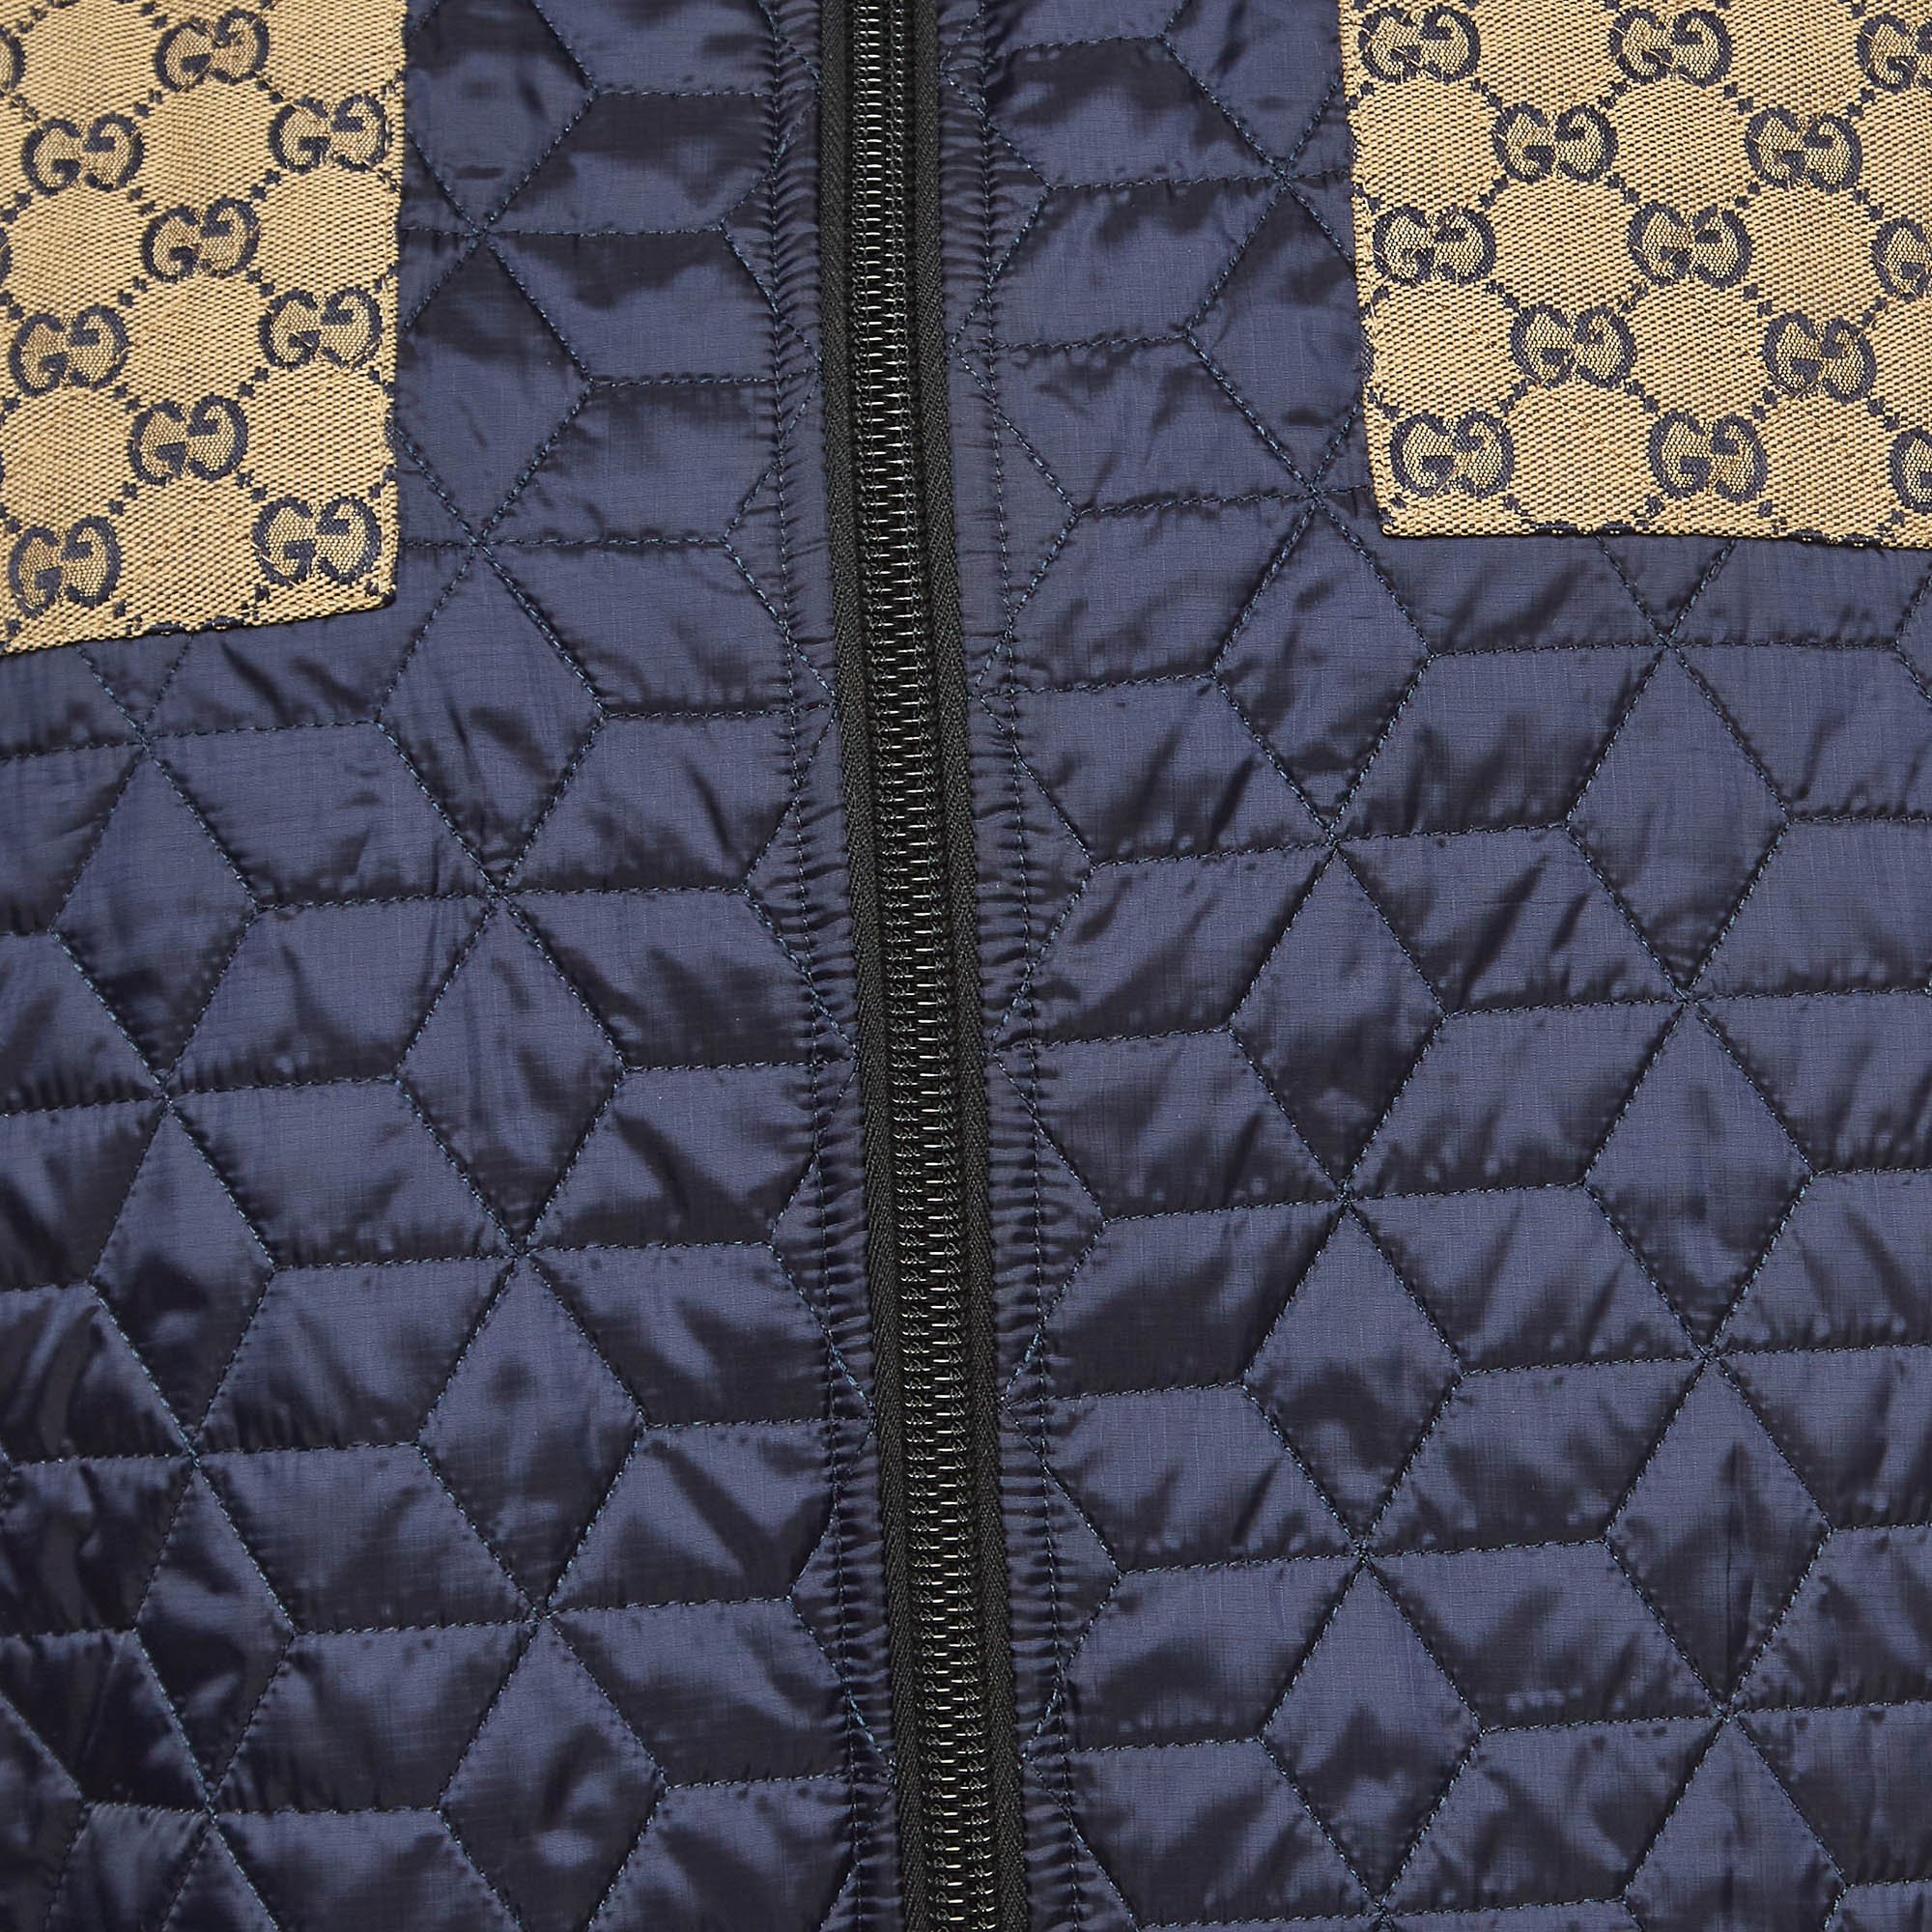 Gucci Navy Blue Quilted Synthetic & Canvas Jacket XL